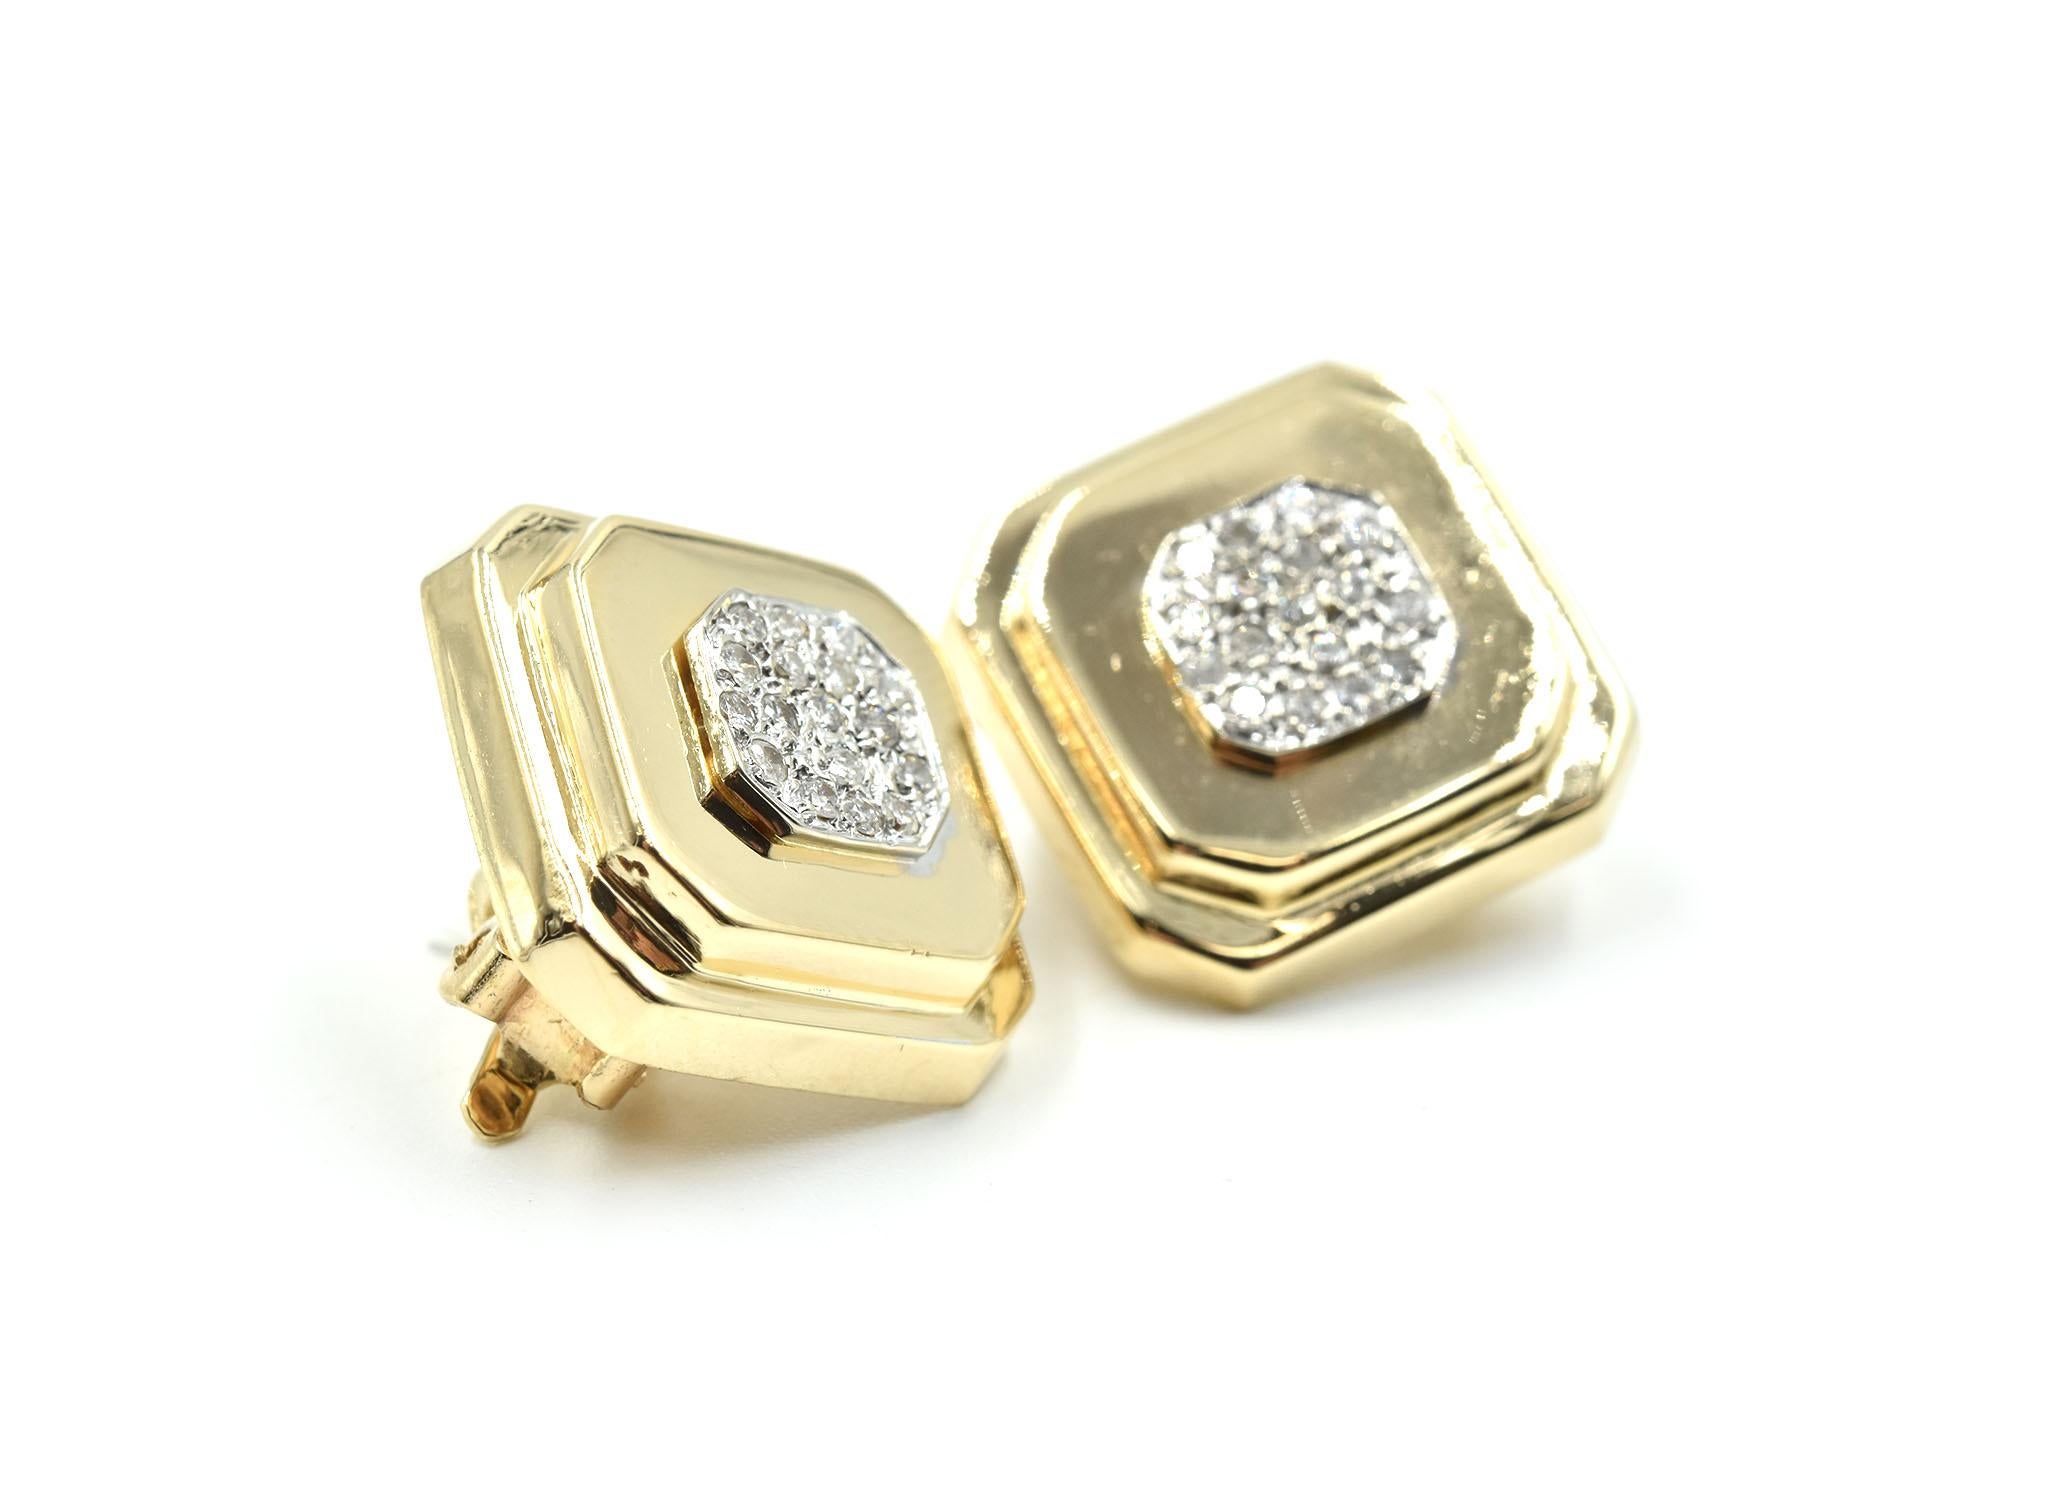 This pair of earrings are accomplished with dazzling diamonds! These earrings are made in 14k yellow gold with clusters of round diamonds. Each earring is made with a square shaped mount with cut corners in a high polish. In total, the earrings are